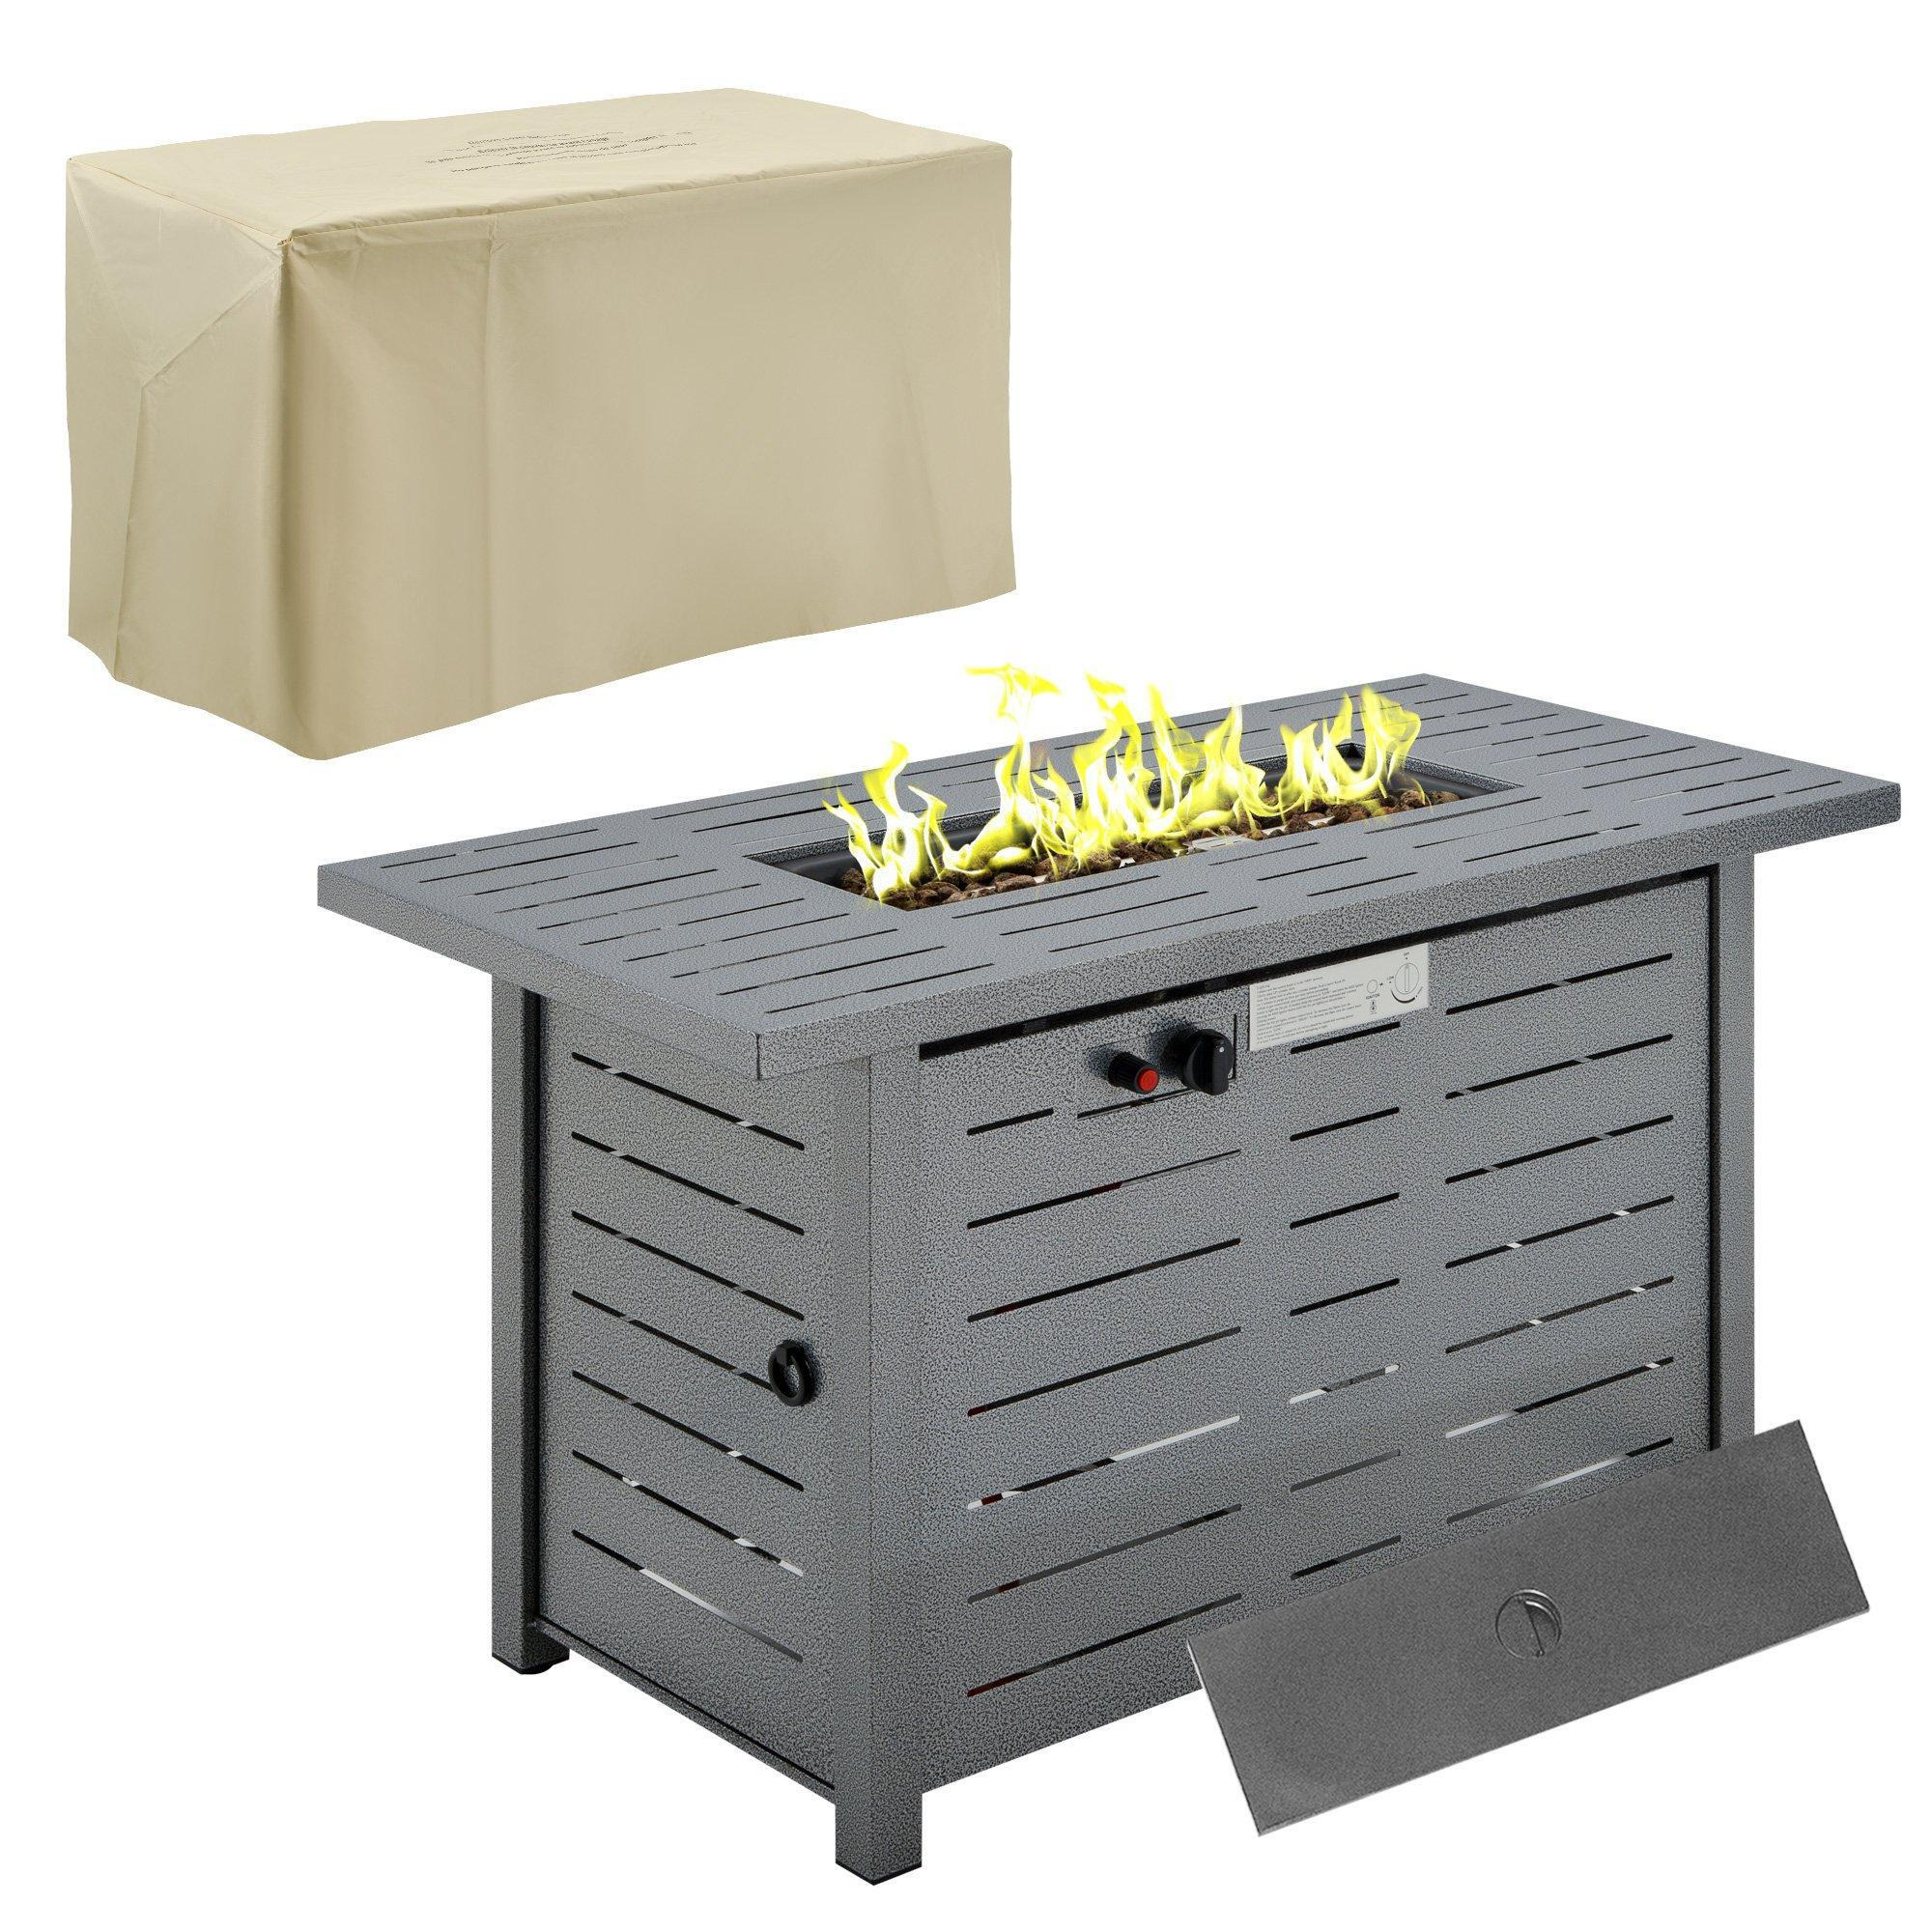 Outdoor Gas Fire Pit Table Smokeless Firepit w/ Rain Cover, Lid - image 1